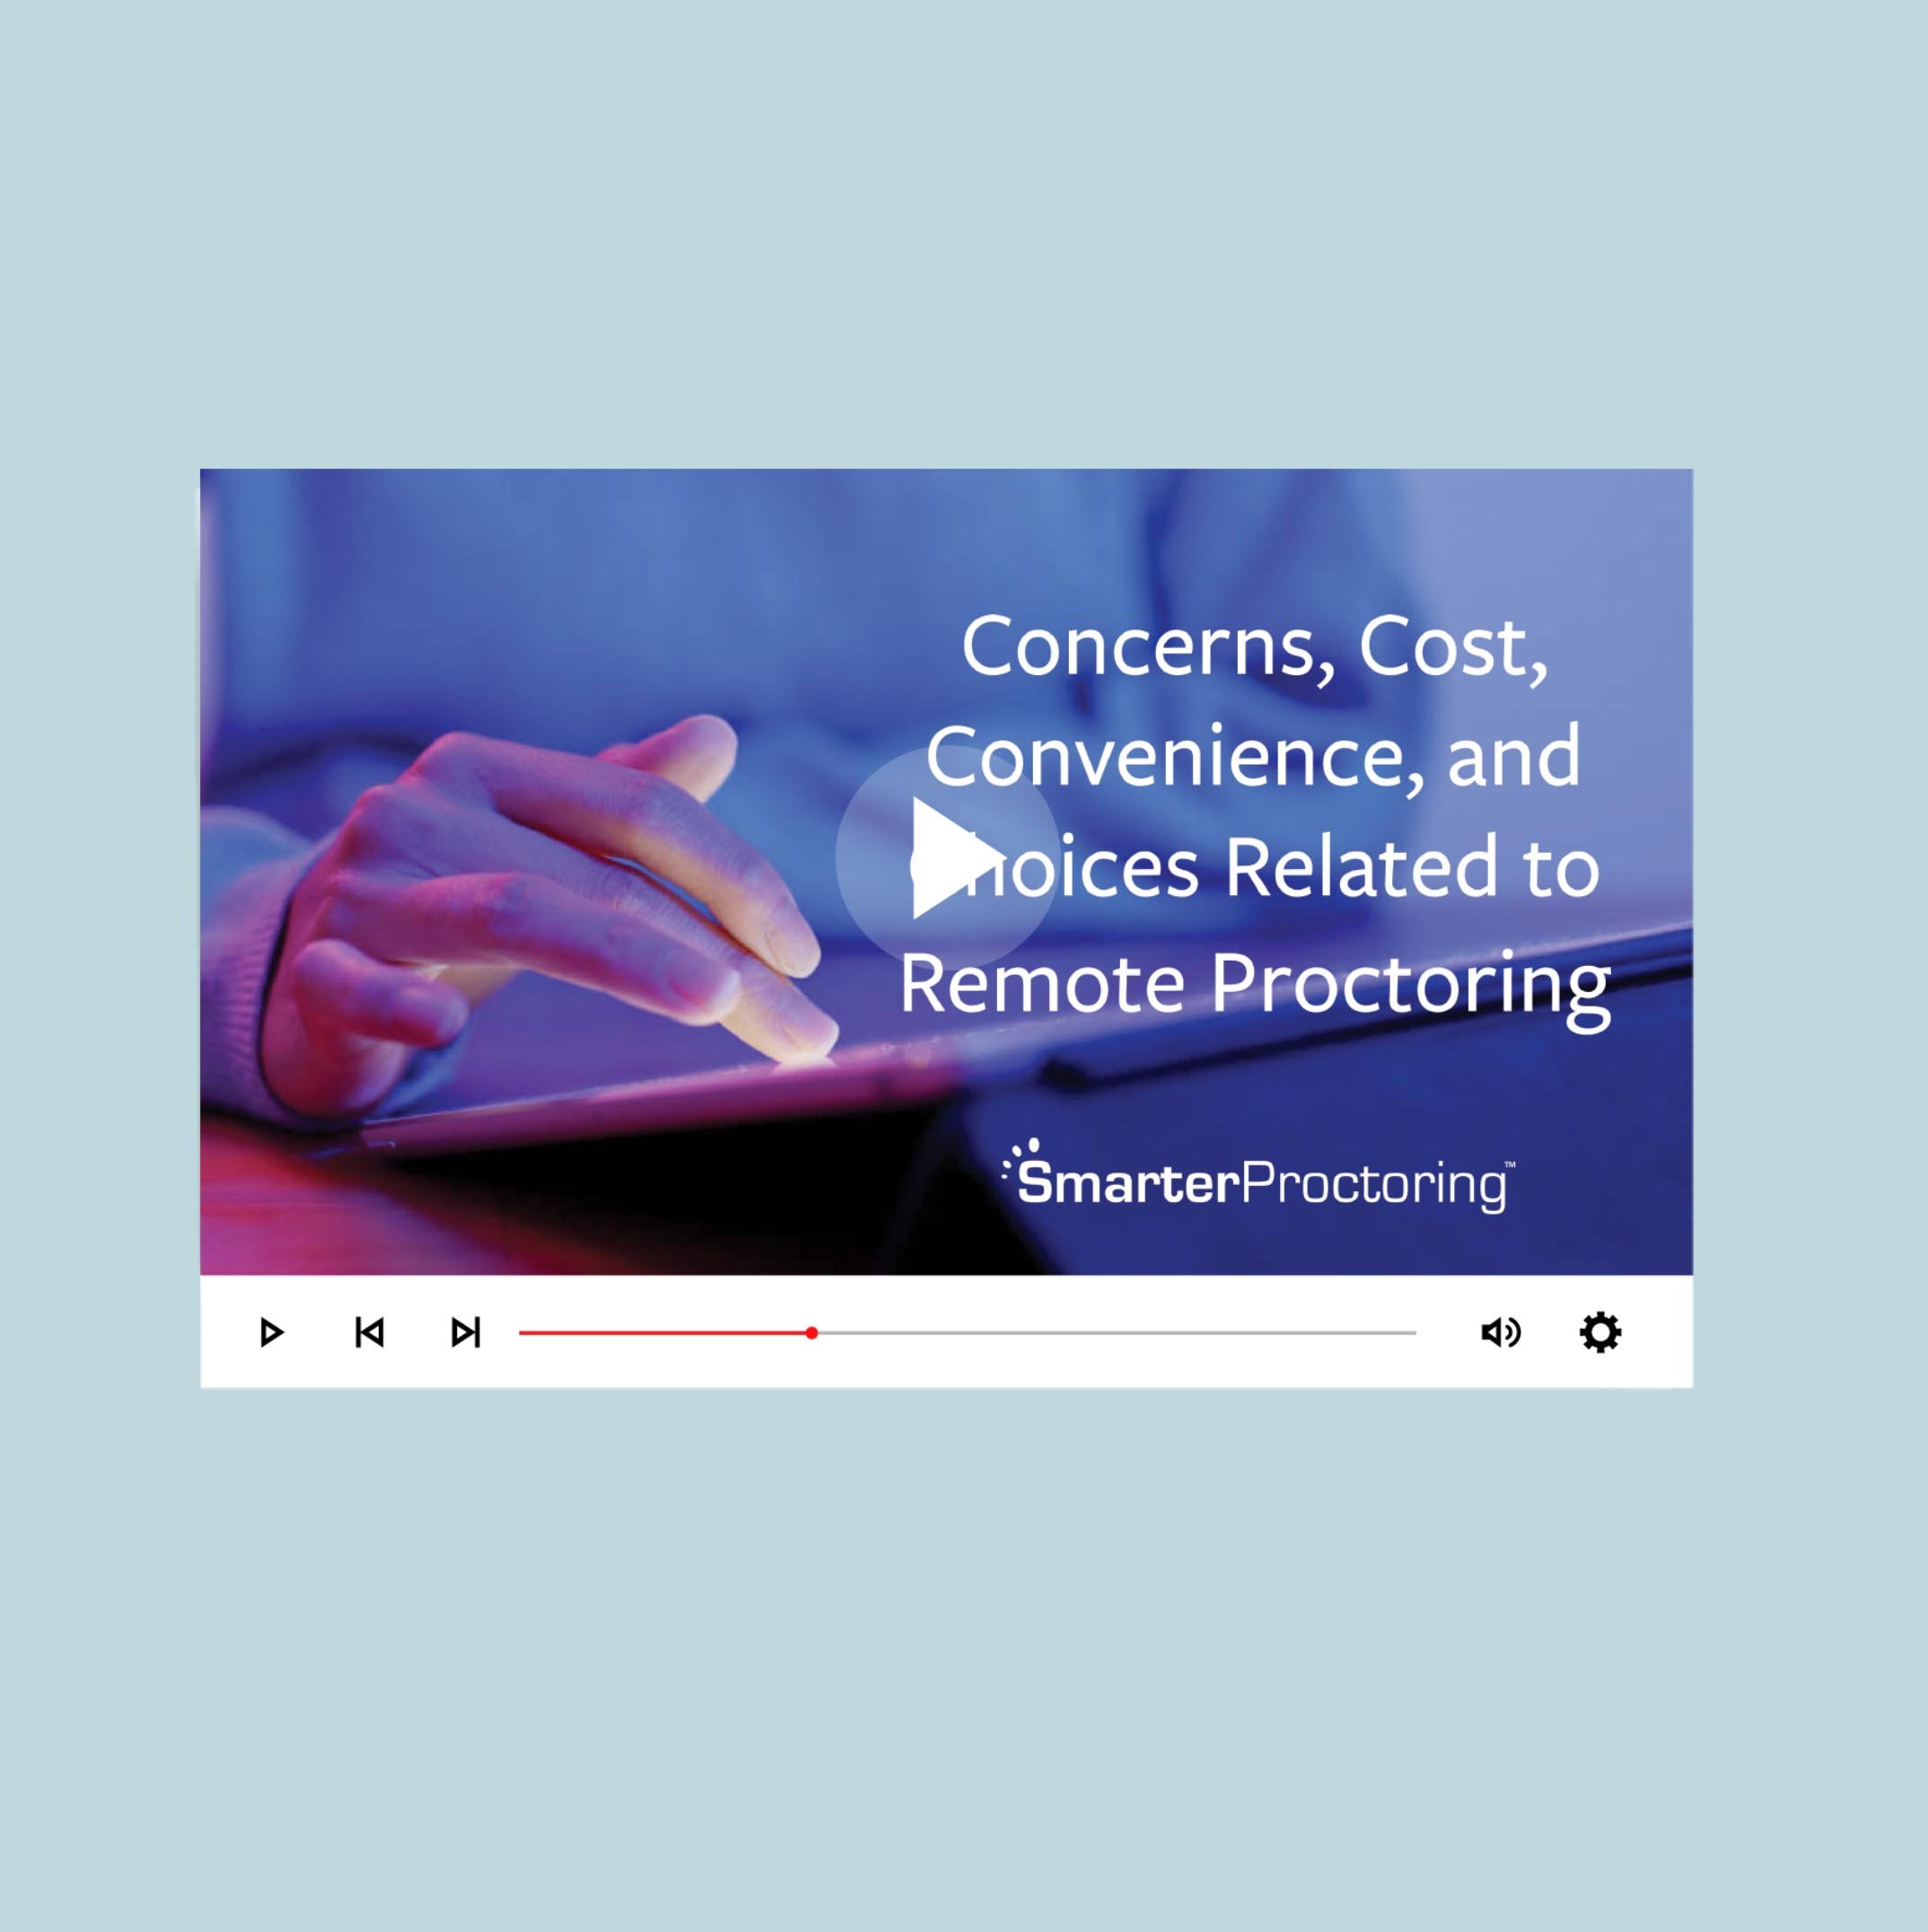 Concerns, Cost, Convenience, and choices related to remote proctoring